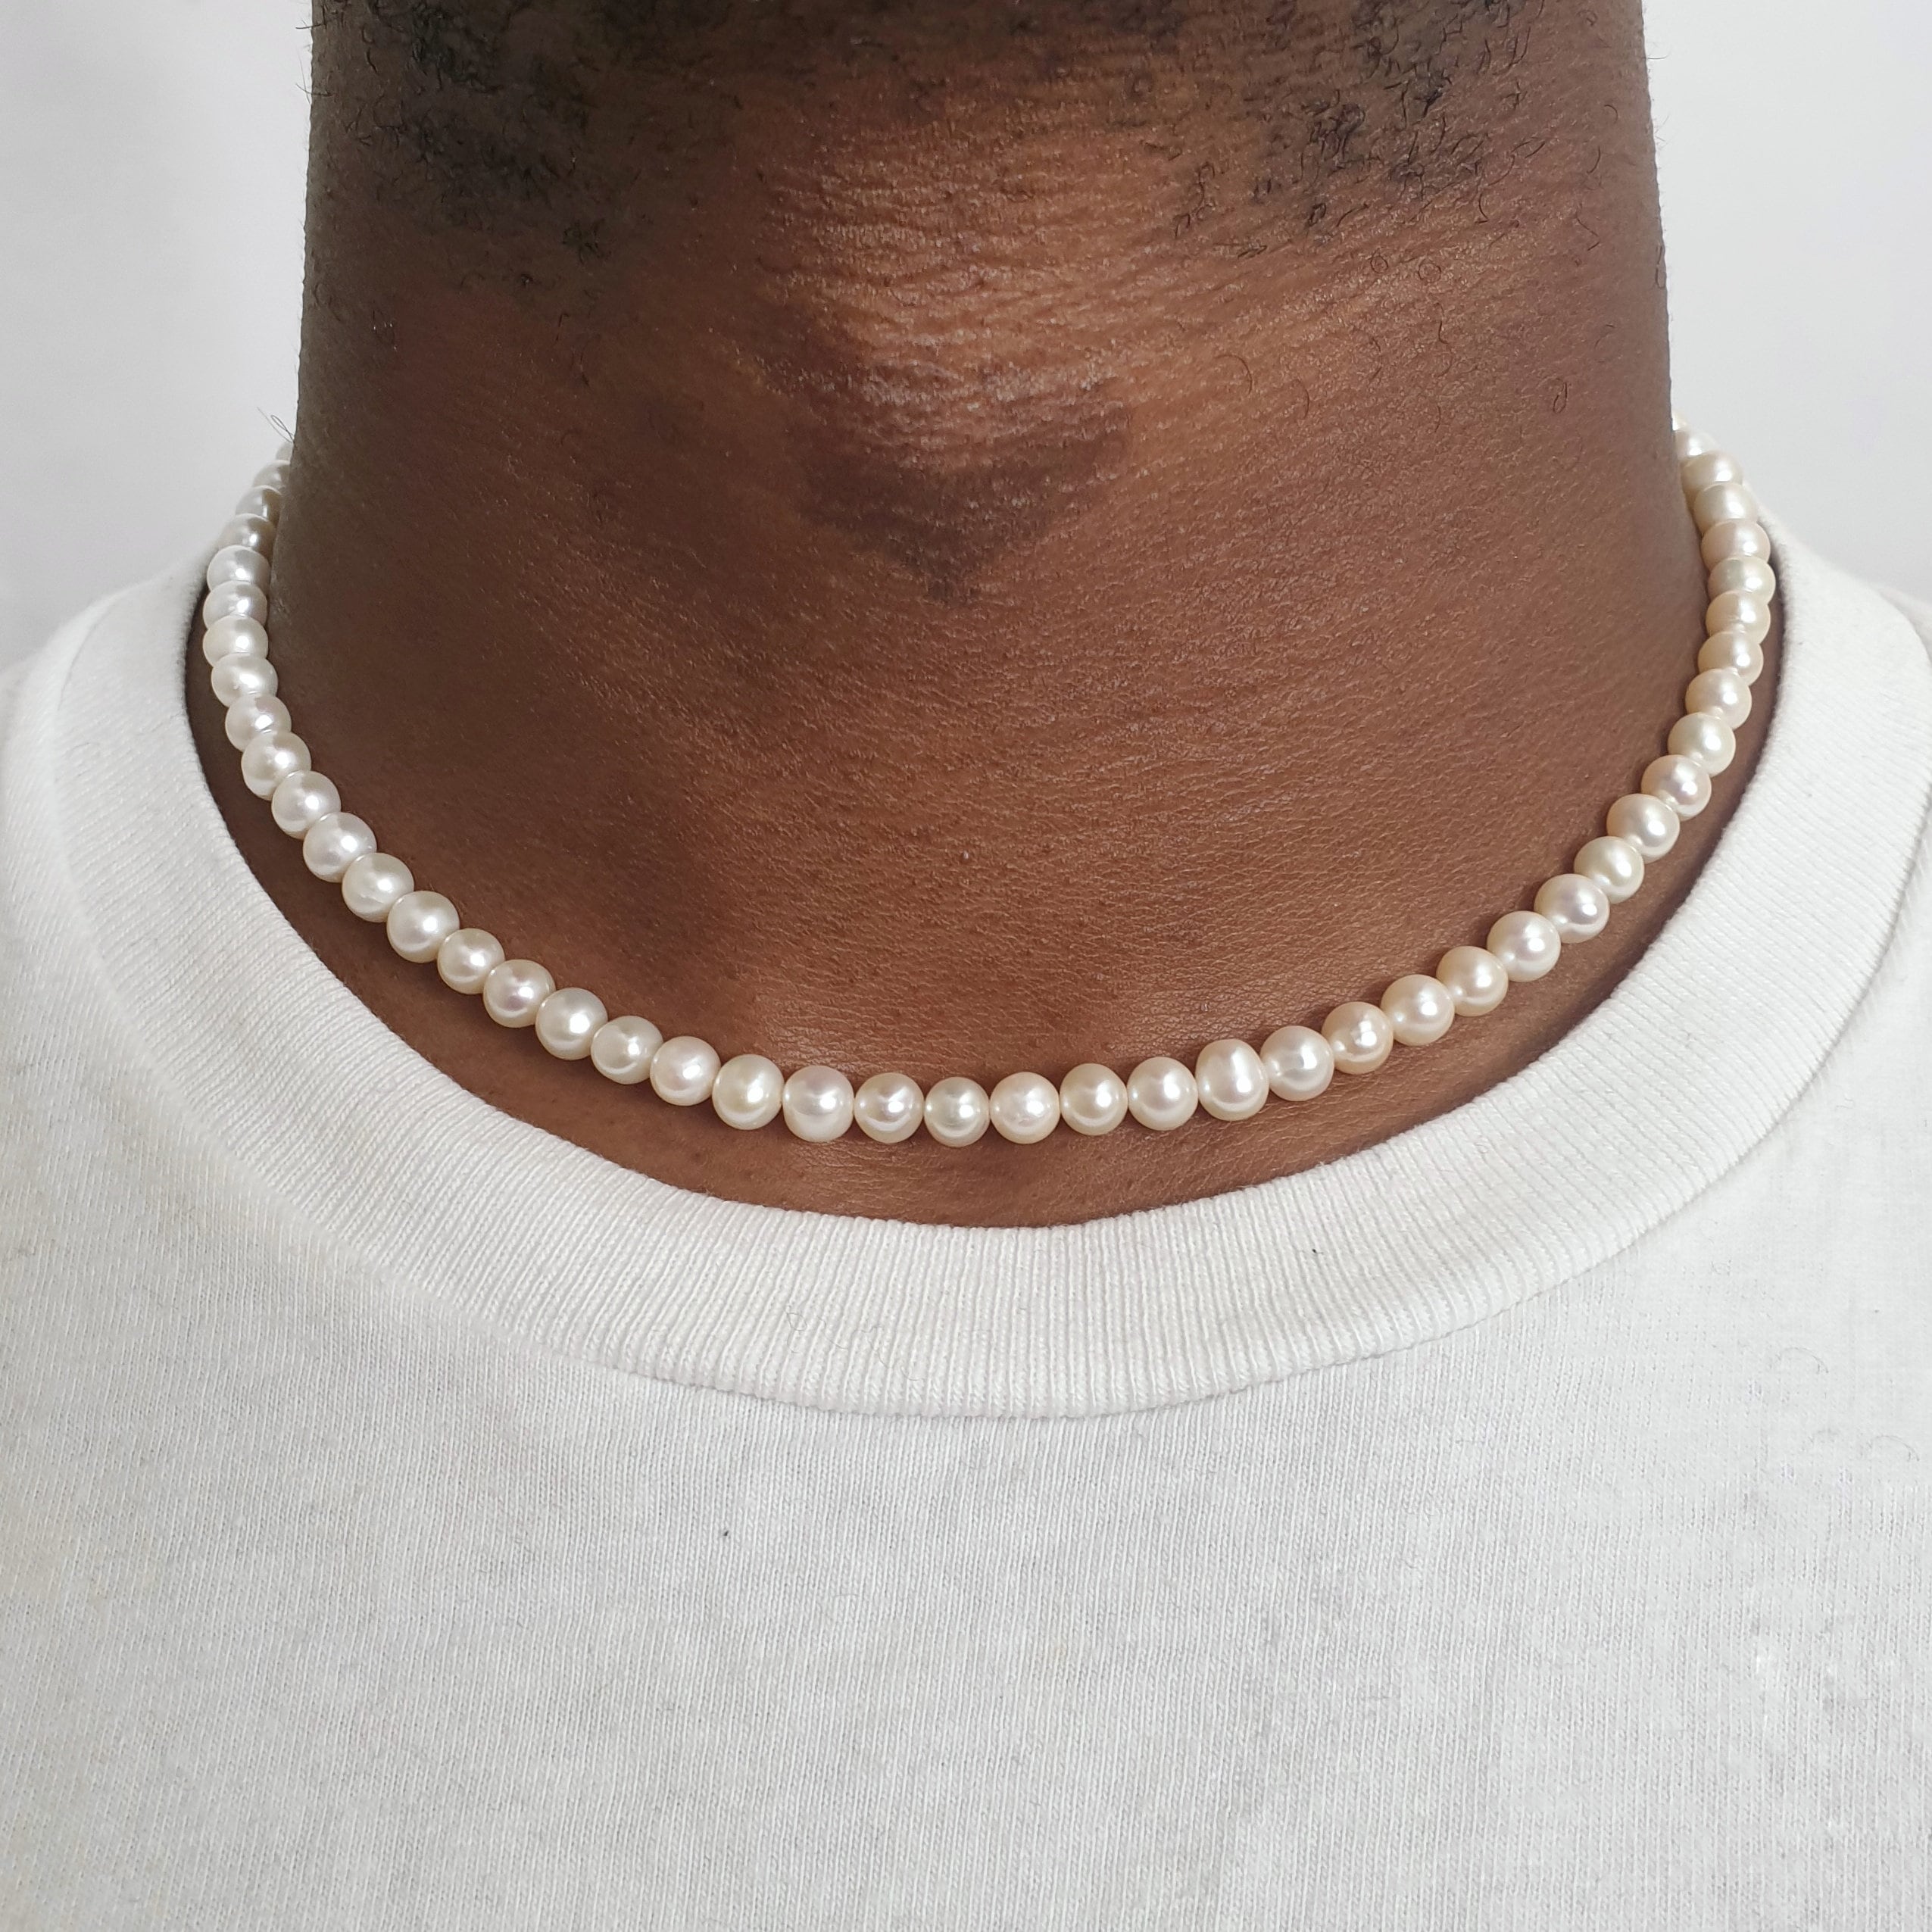 Buy Pearl Necklace for Men,White Pearl Necklace for Women,Round Pearl  Choker Necklace,Pearl Jewelry, bead, bead, at Amazon.in